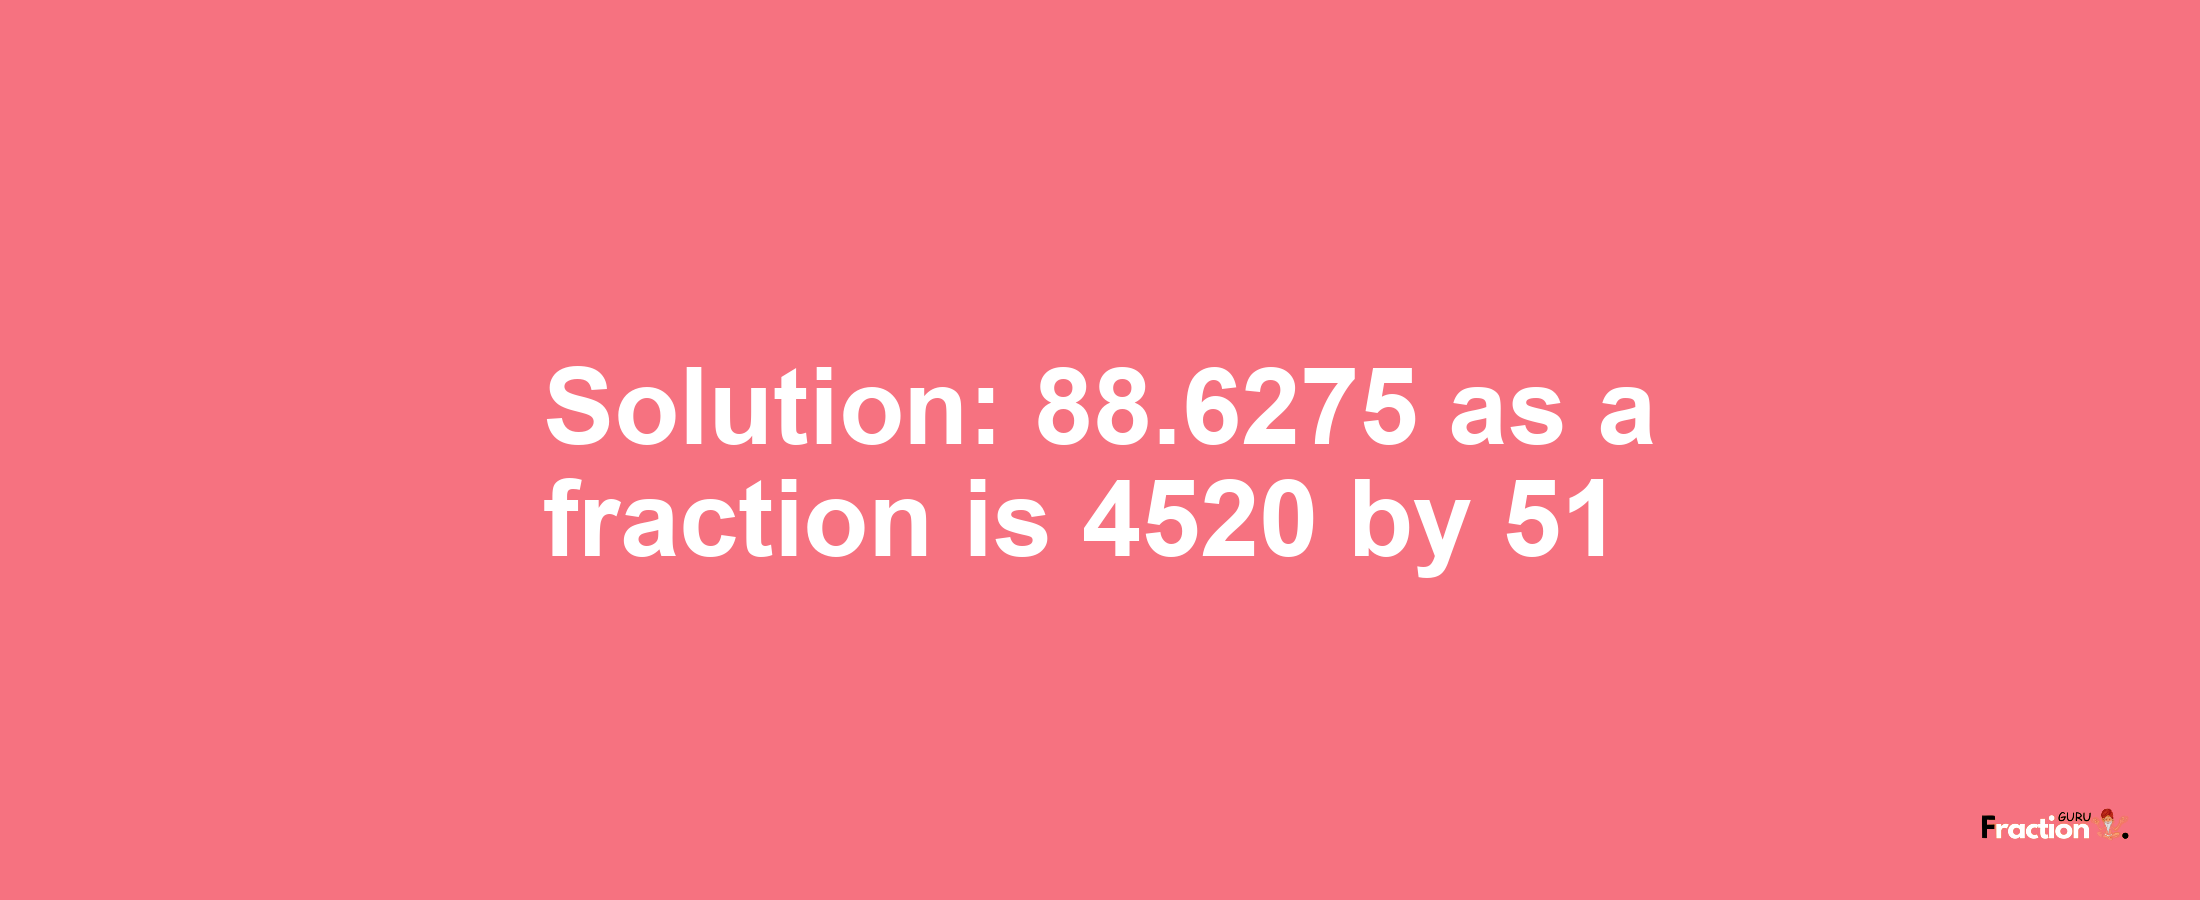 Solution:88.6275 as a fraction is 4520/51